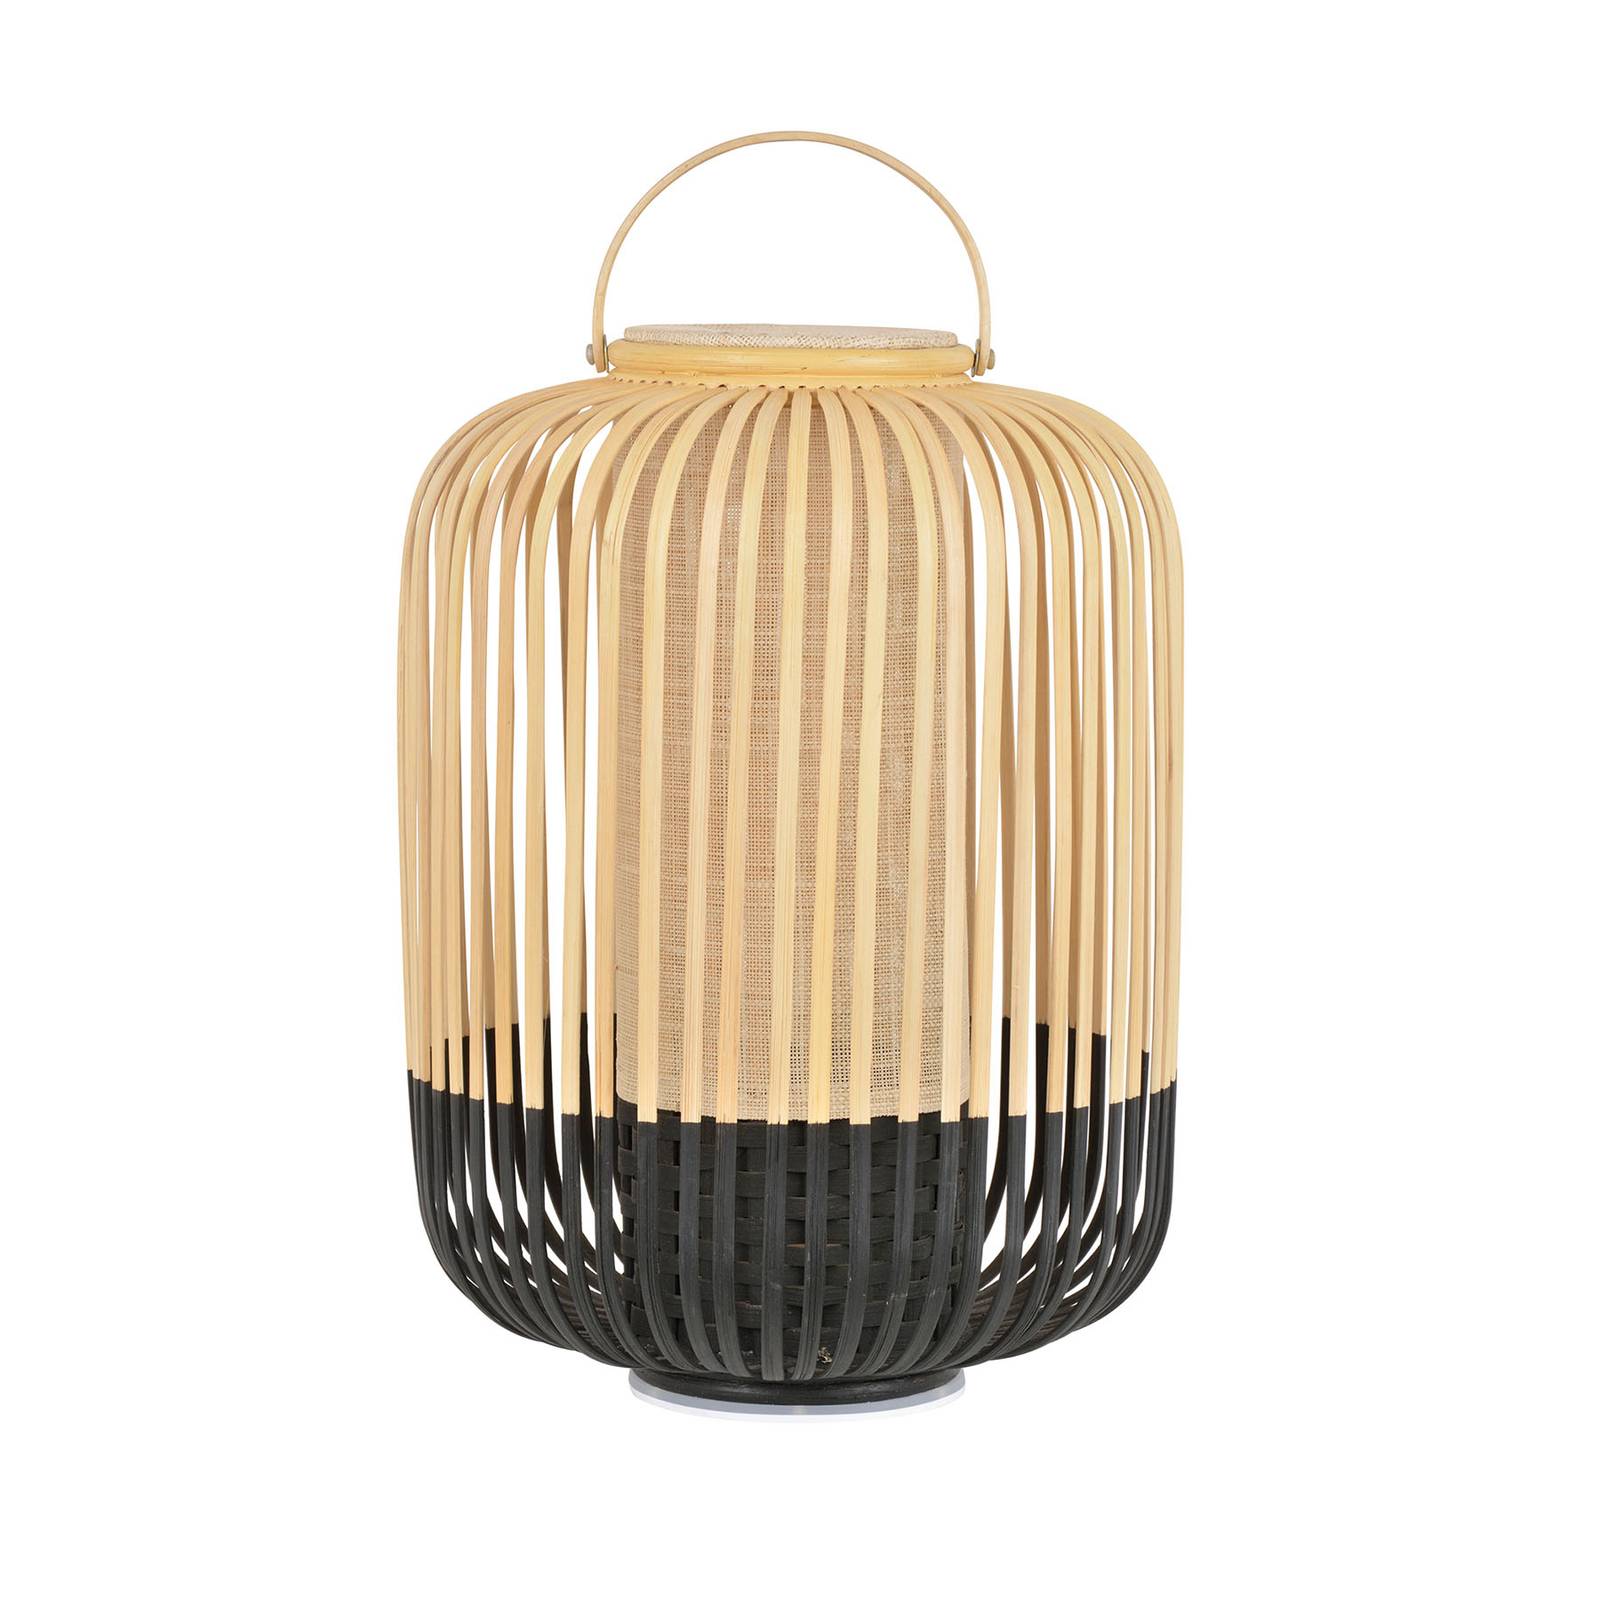 Image of Forestier Take A Way M lampe déco, IP66, noire 3700663919684